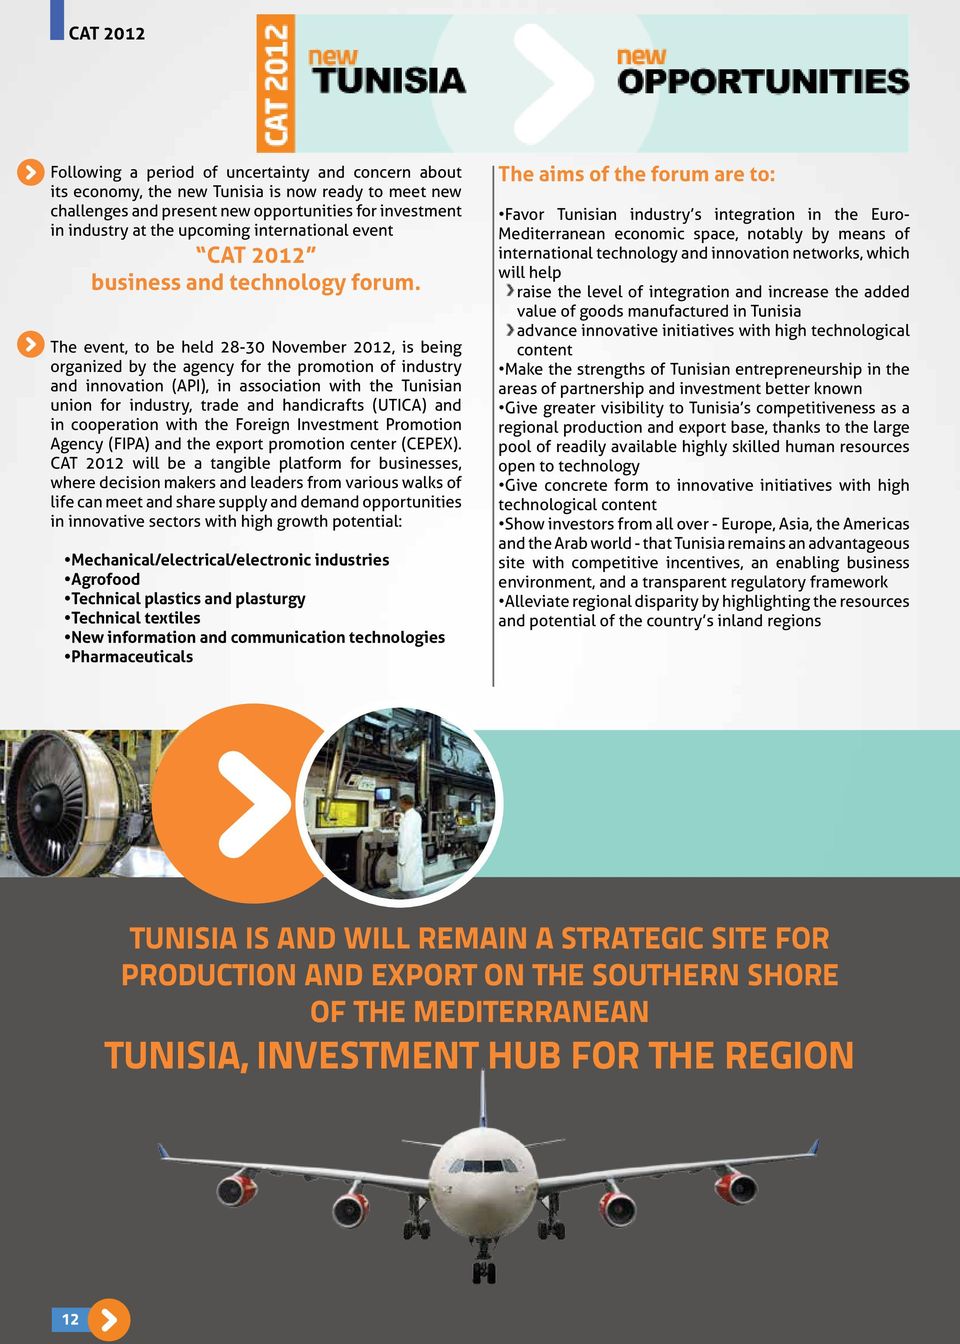 The event, to be held 28-30 November 2012, is being organized by the agency for the promotion of industry and innovation (API), in association with the Tunisian union for industry, trade and